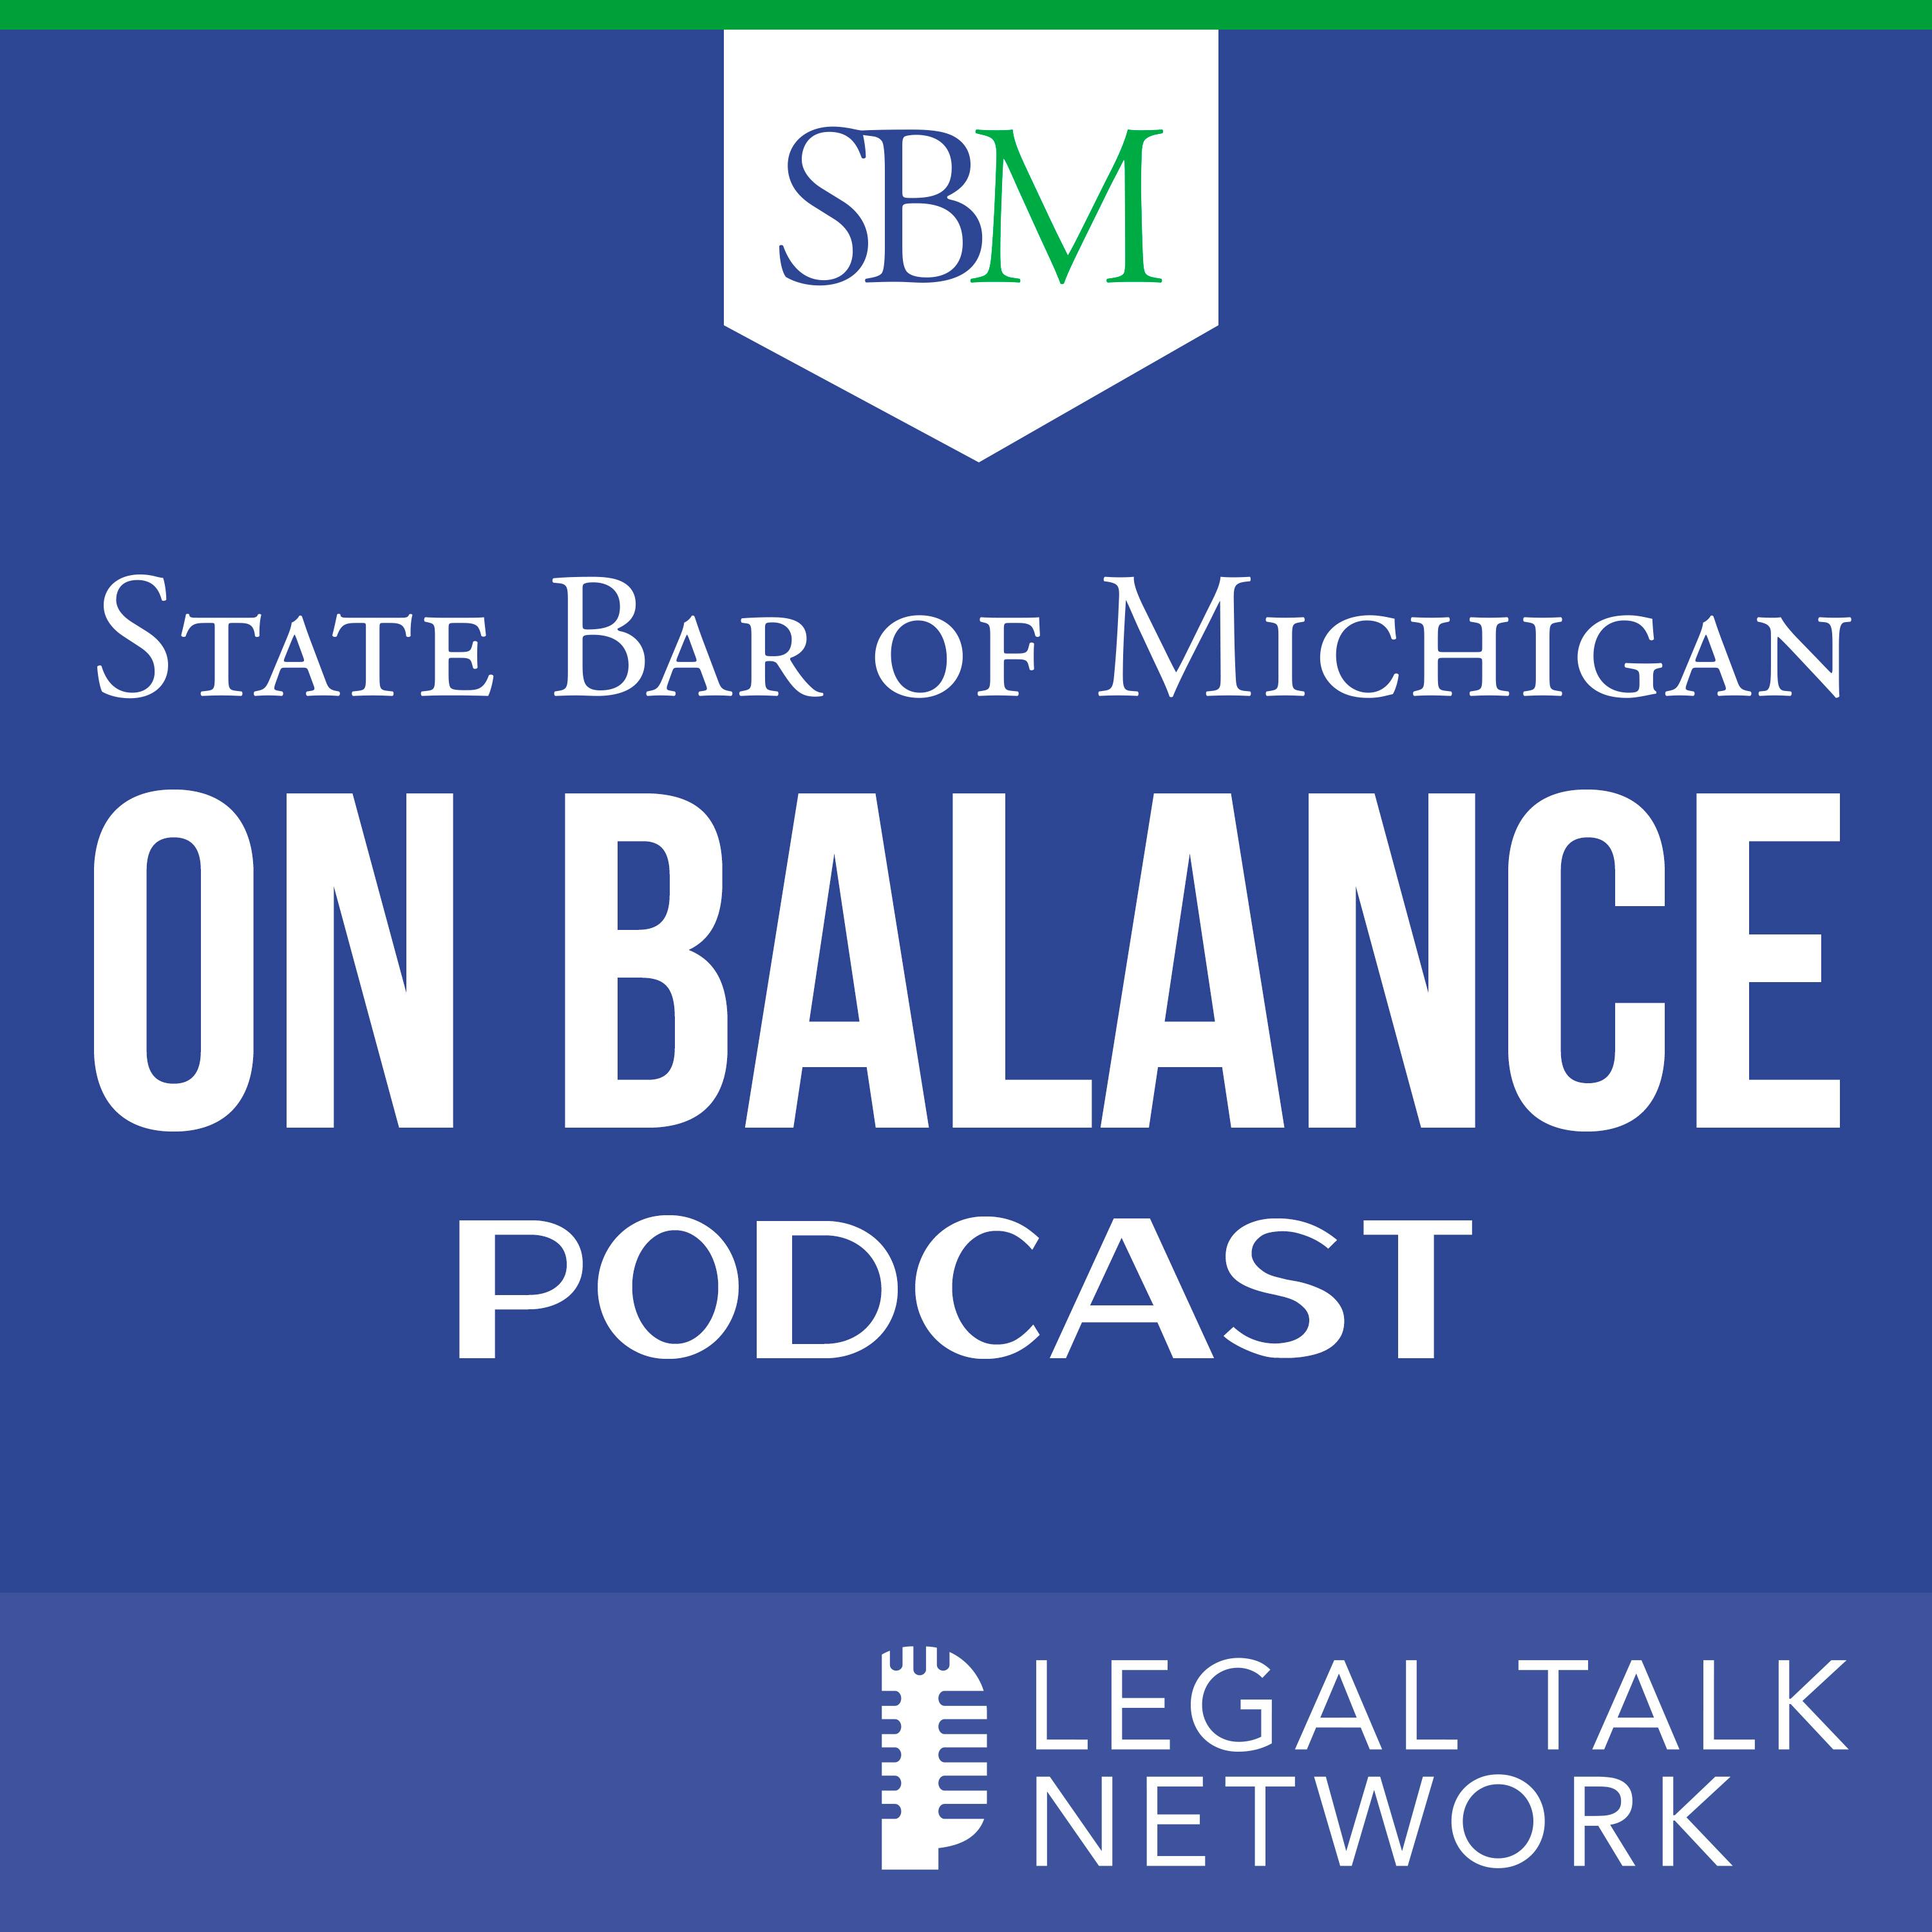 Teaser: Introducing the State Bar of Michigan’s “On Balance” Podcast